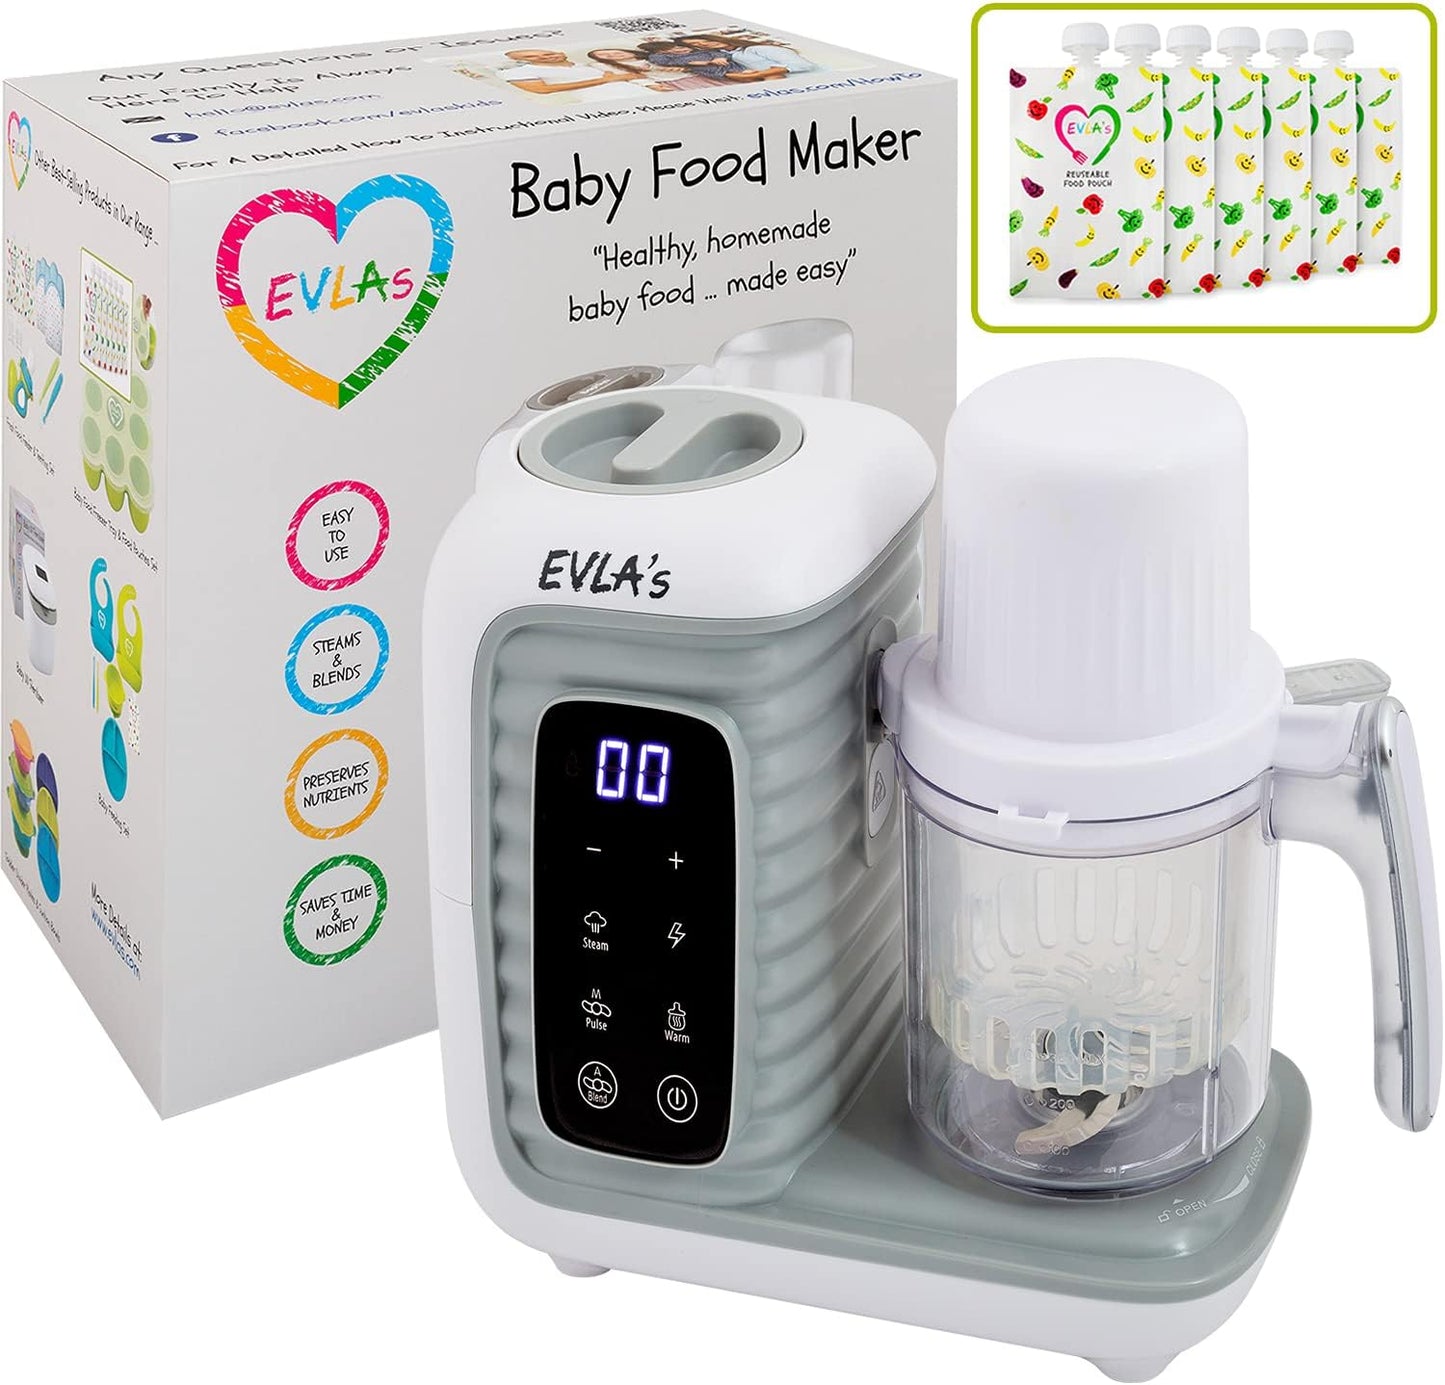 EVLA'S Baby Food Maker, Healthy Homemade Baby Food in Minutes, Steamer, Blender, Baby Food Processor, Touch Screen Control, includes 6 Reusable Food Pouches for Storage or Travel, White